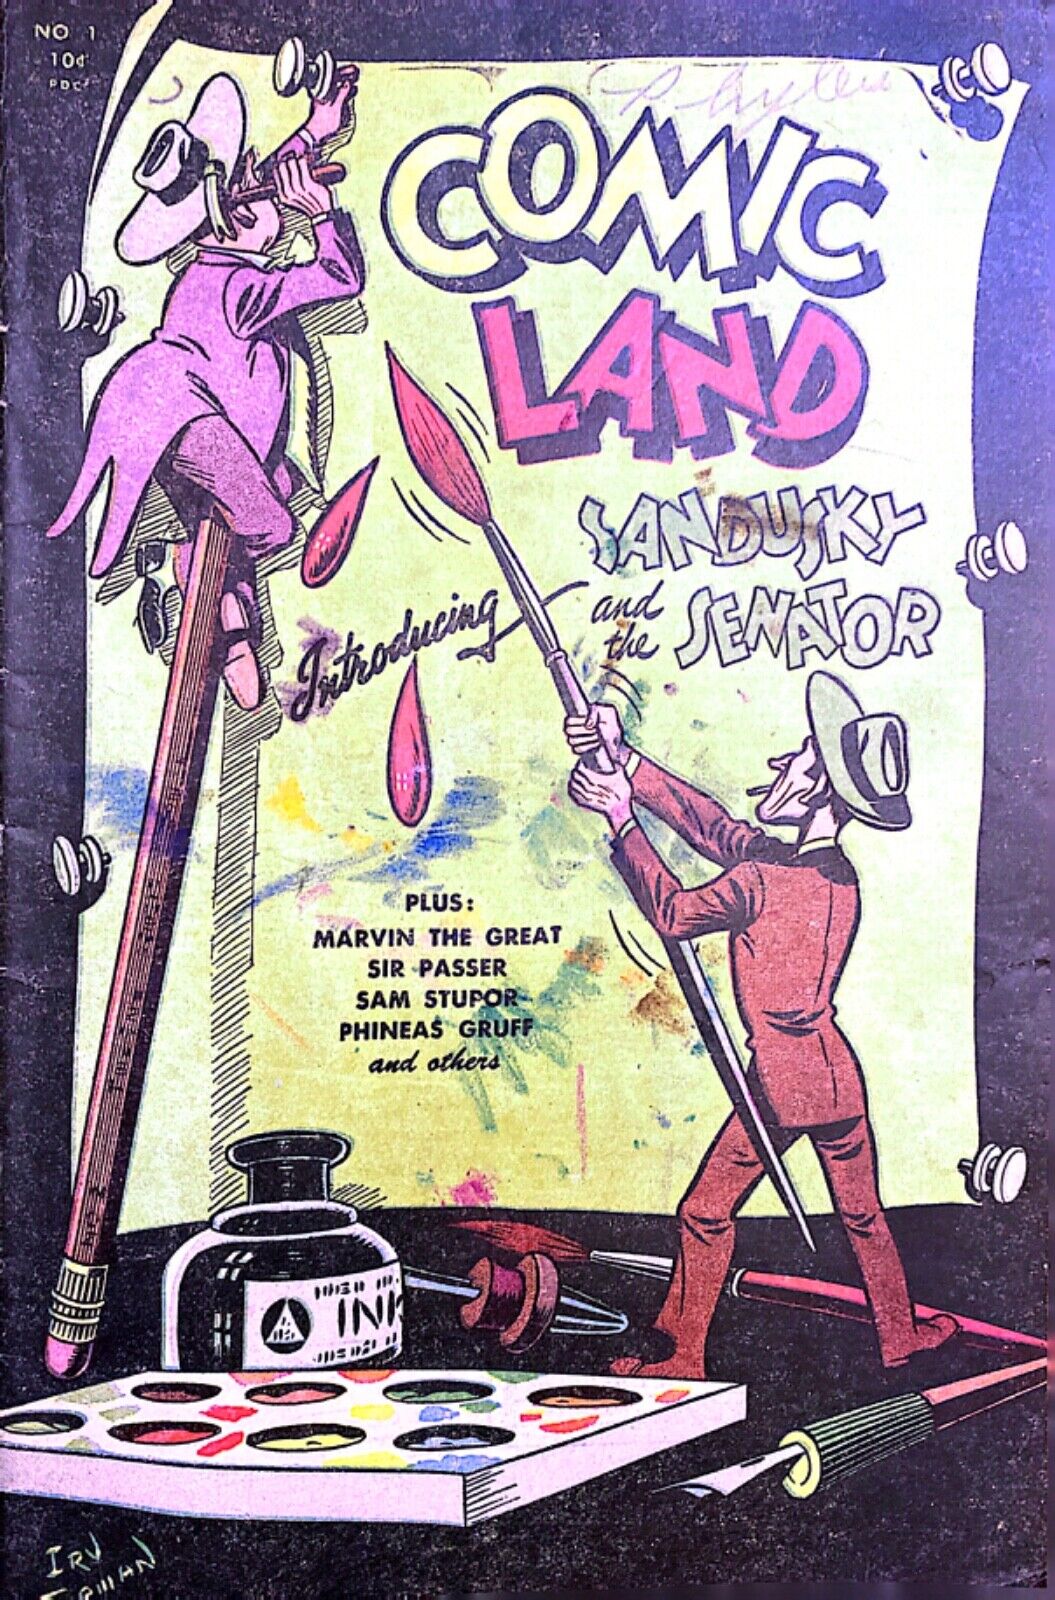 Comic Land #1 by Fact & Fiction Publications (1946) - Very good (4.0)